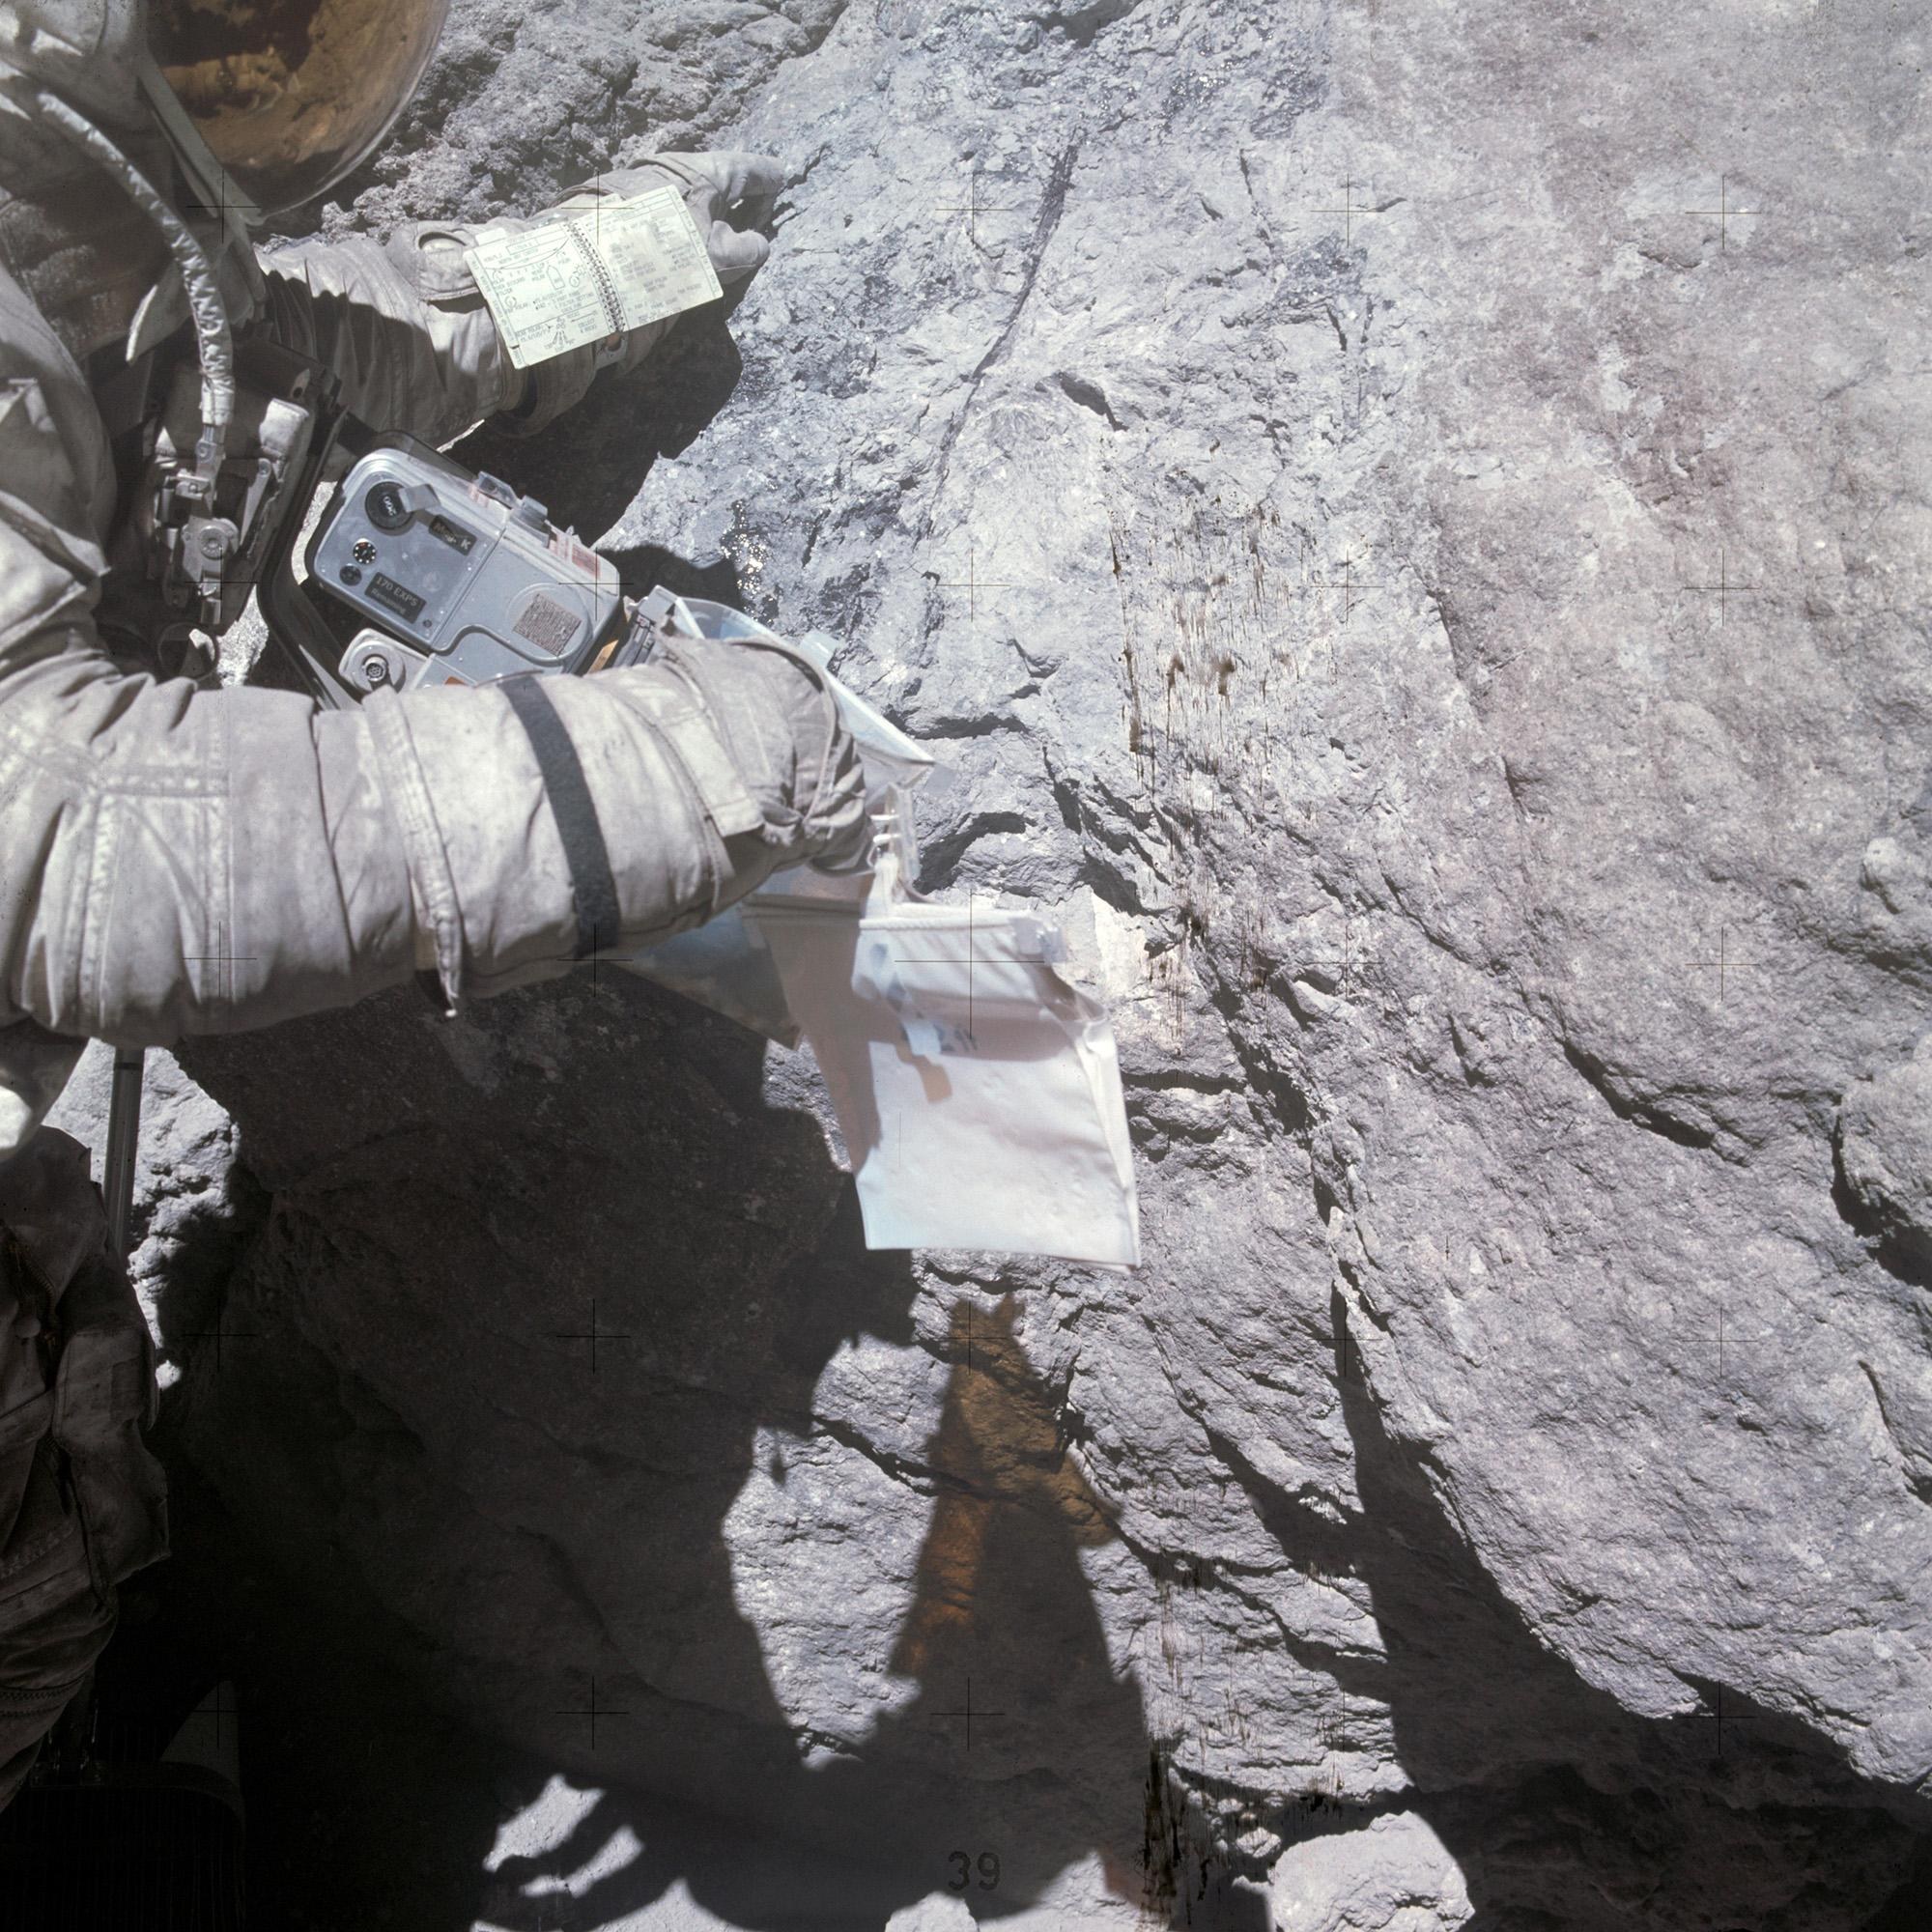 Charles Duke points to a feldspar crystal on Houston Rock; the excursion manual can be seen on his left arm